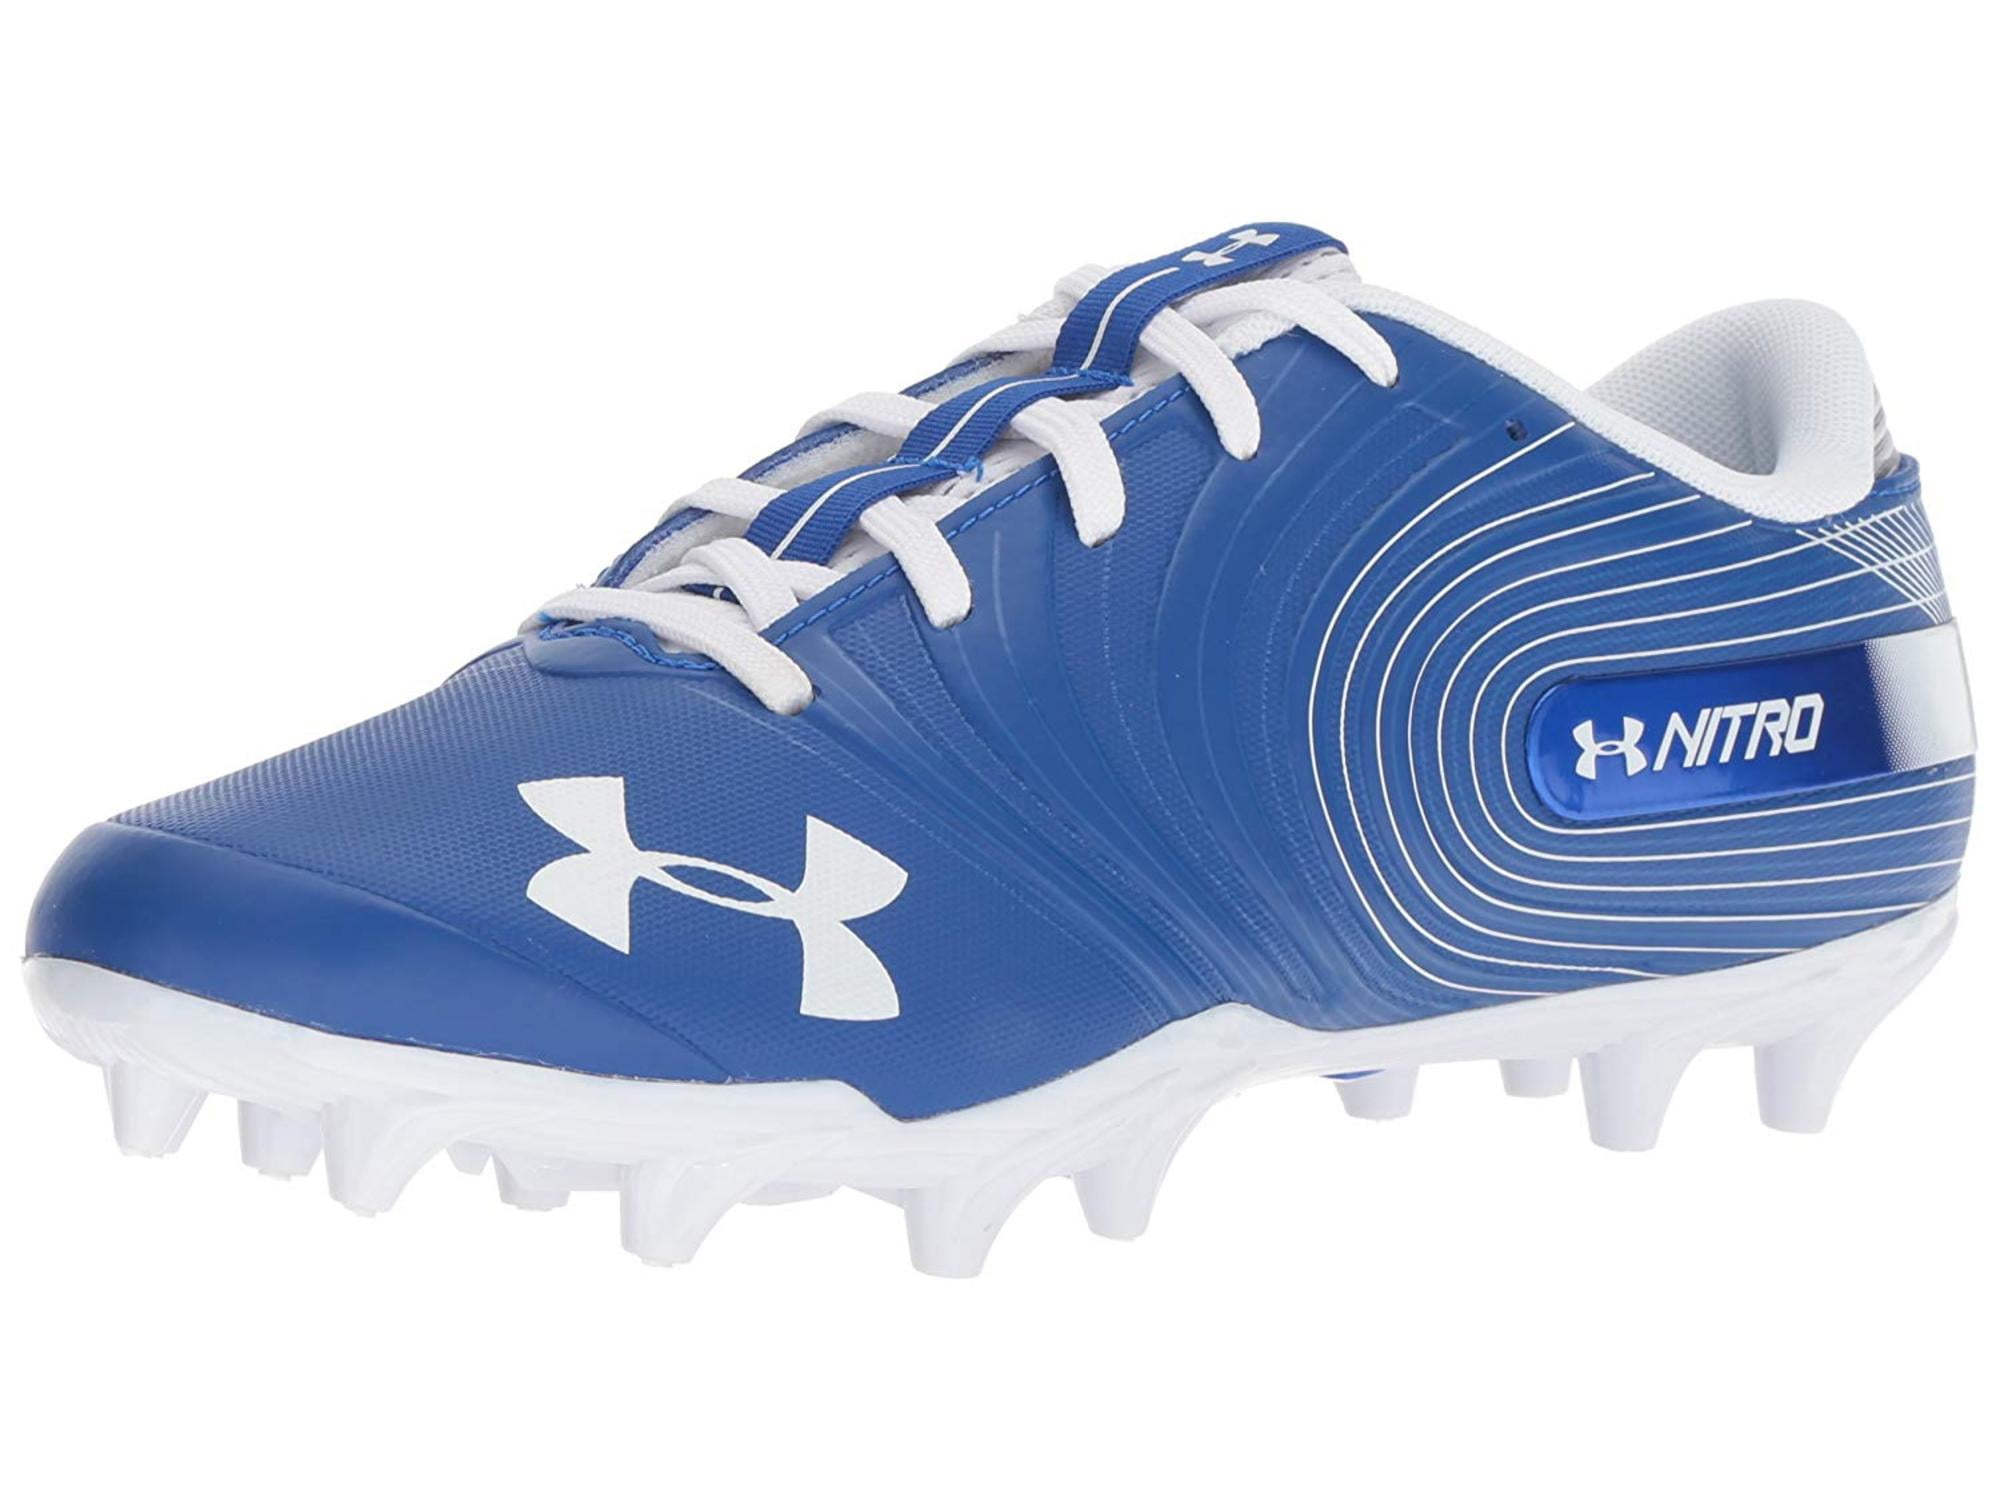 Brand New Under Armour Team Nitro Low D Men's Football Cleats 